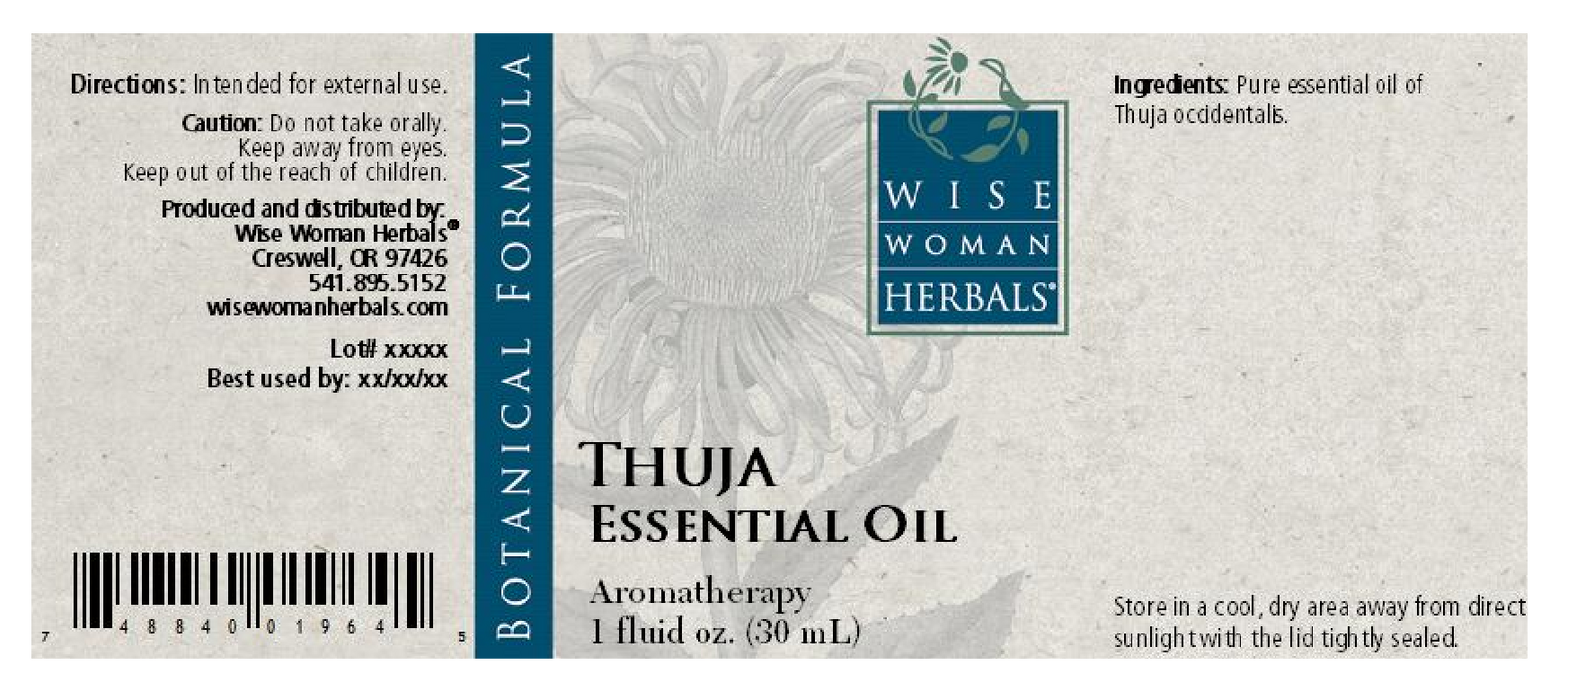 Wise Woman Herbals Thuja Essential Oil 1 oz